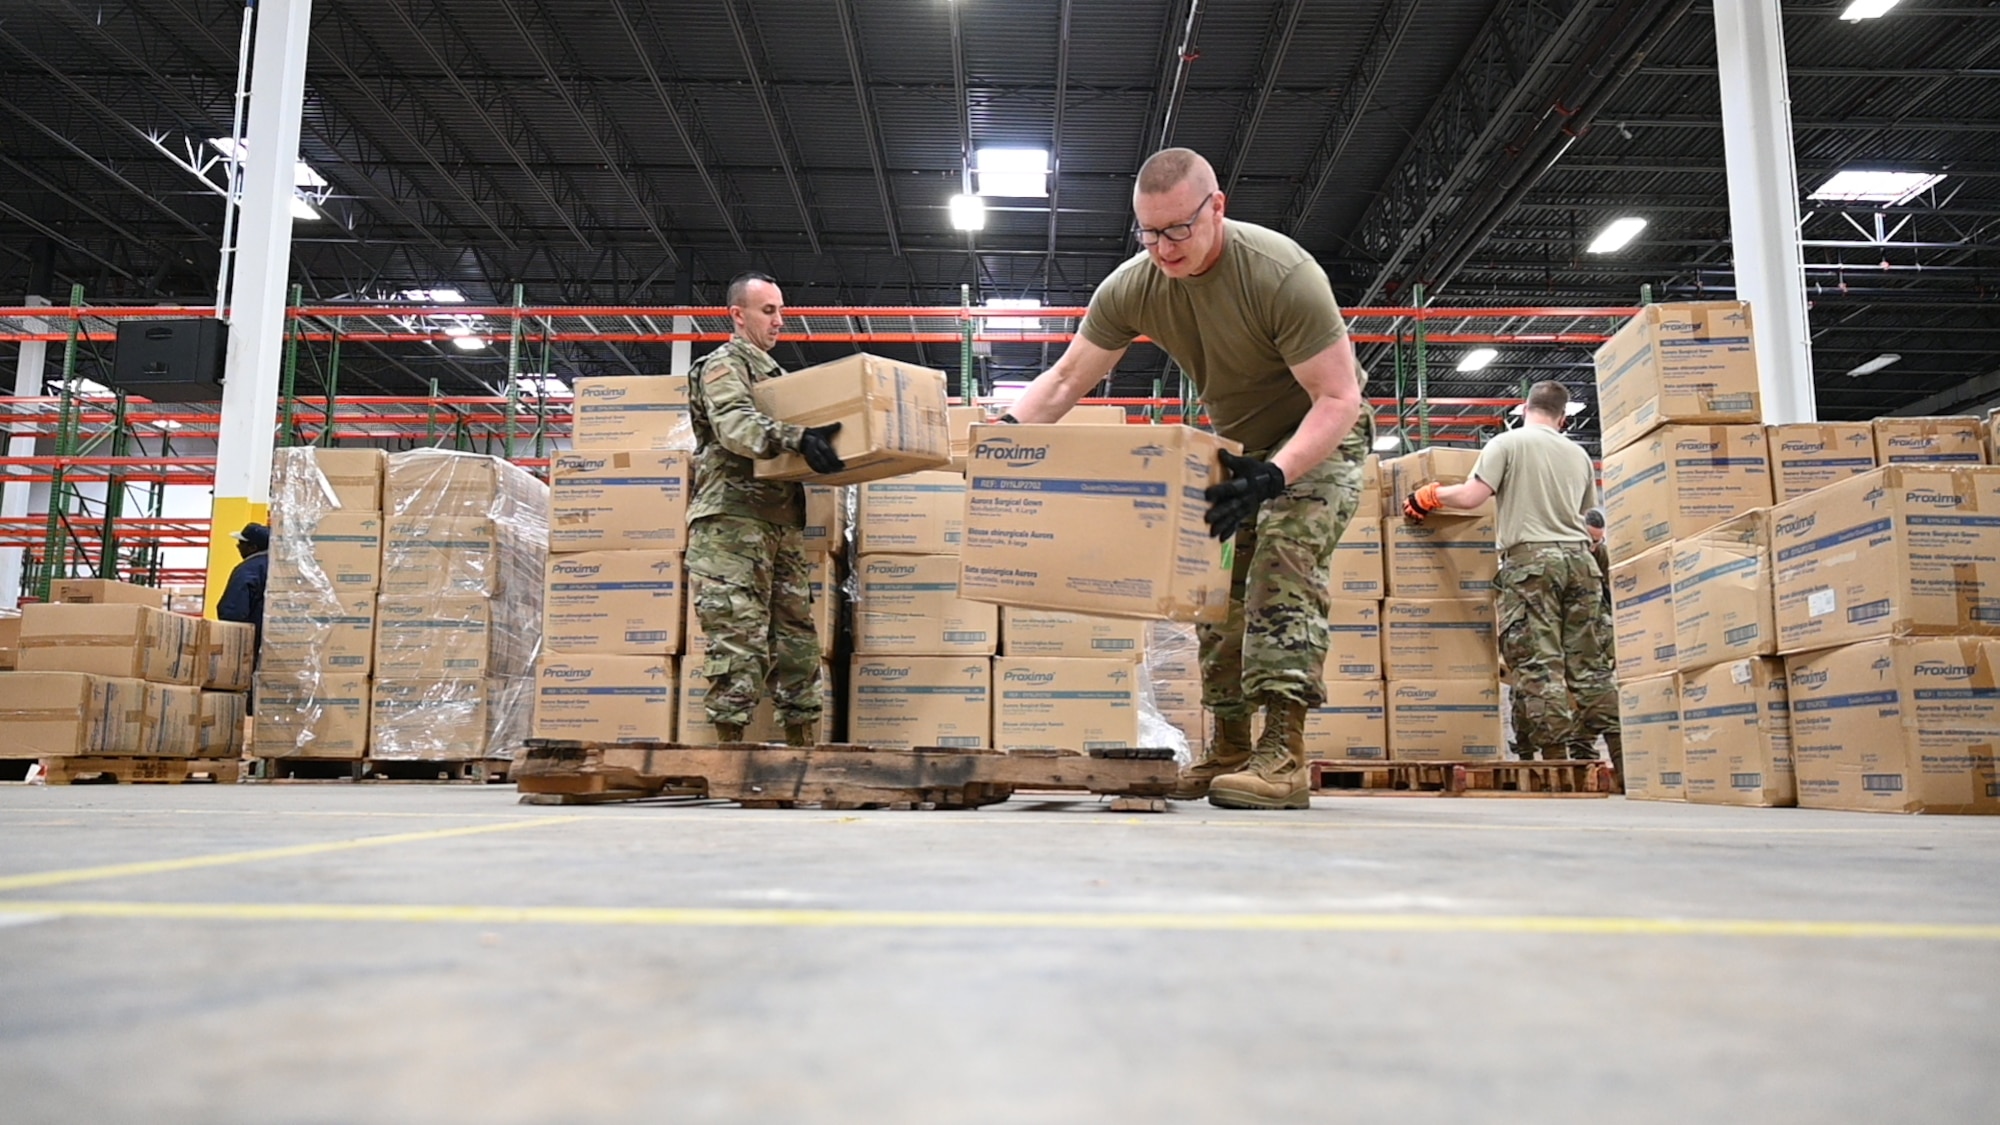 (From left) U.S. Air Force Tech. Sgt. Bradly Tuthill and U.S. Air Force Master Sgt. Richard Malloy, both ground transportation specialists with the 175the Logistics Readiness Squadron, prepare and load boxes of medical supplies and equipment March 19, 2020, at the Maryland Strategic National Stockpile location. All assets provided were prioritized for health care workers and hospitals in response to the COVID-19 pandemic. (U.S. Air National Guard photo by Master Sgt. Christopher Schepers)